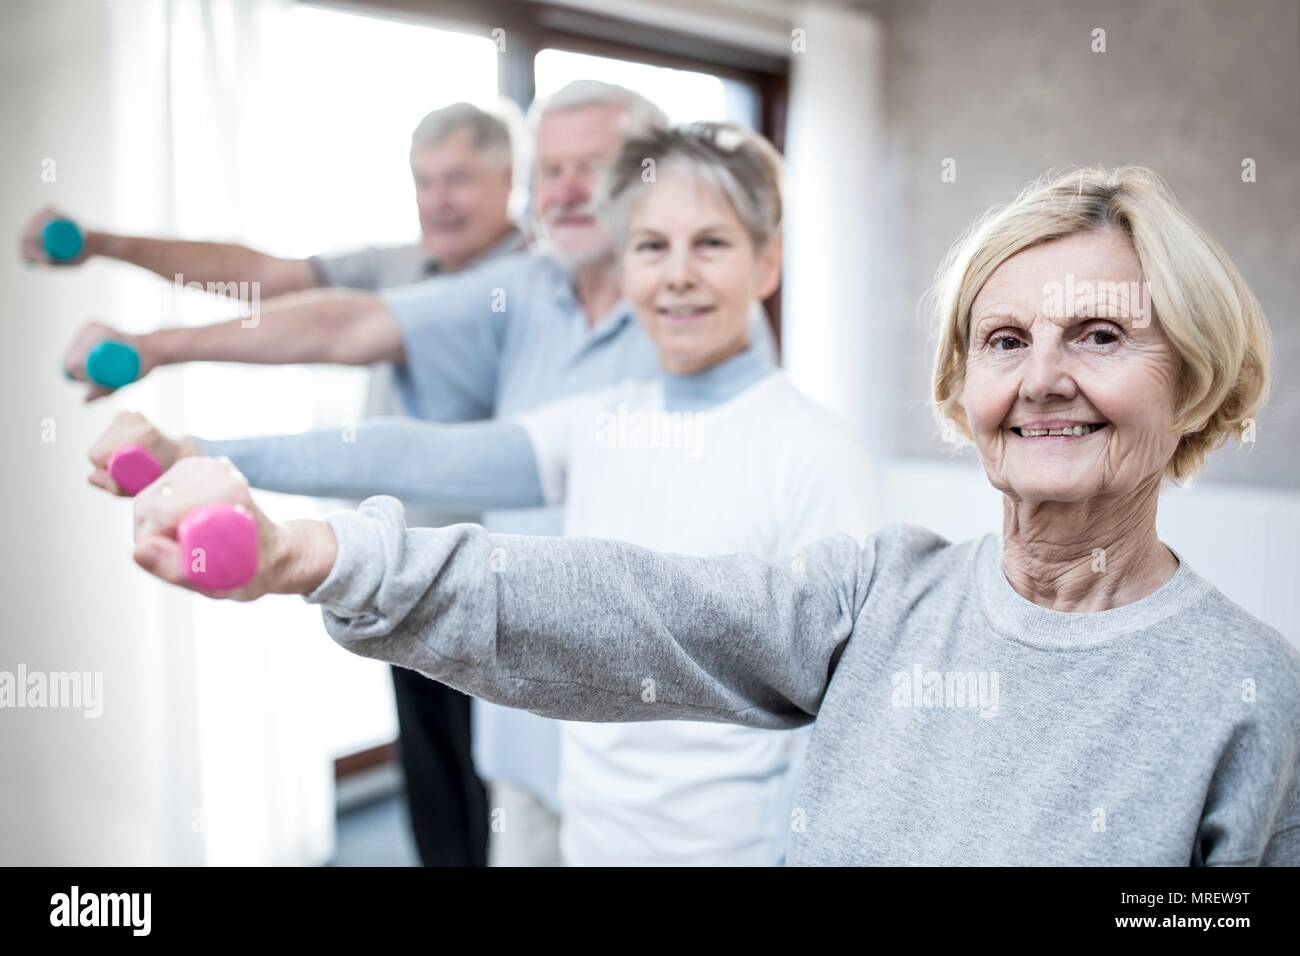 Senior adults holding hand weights. Stock Photo